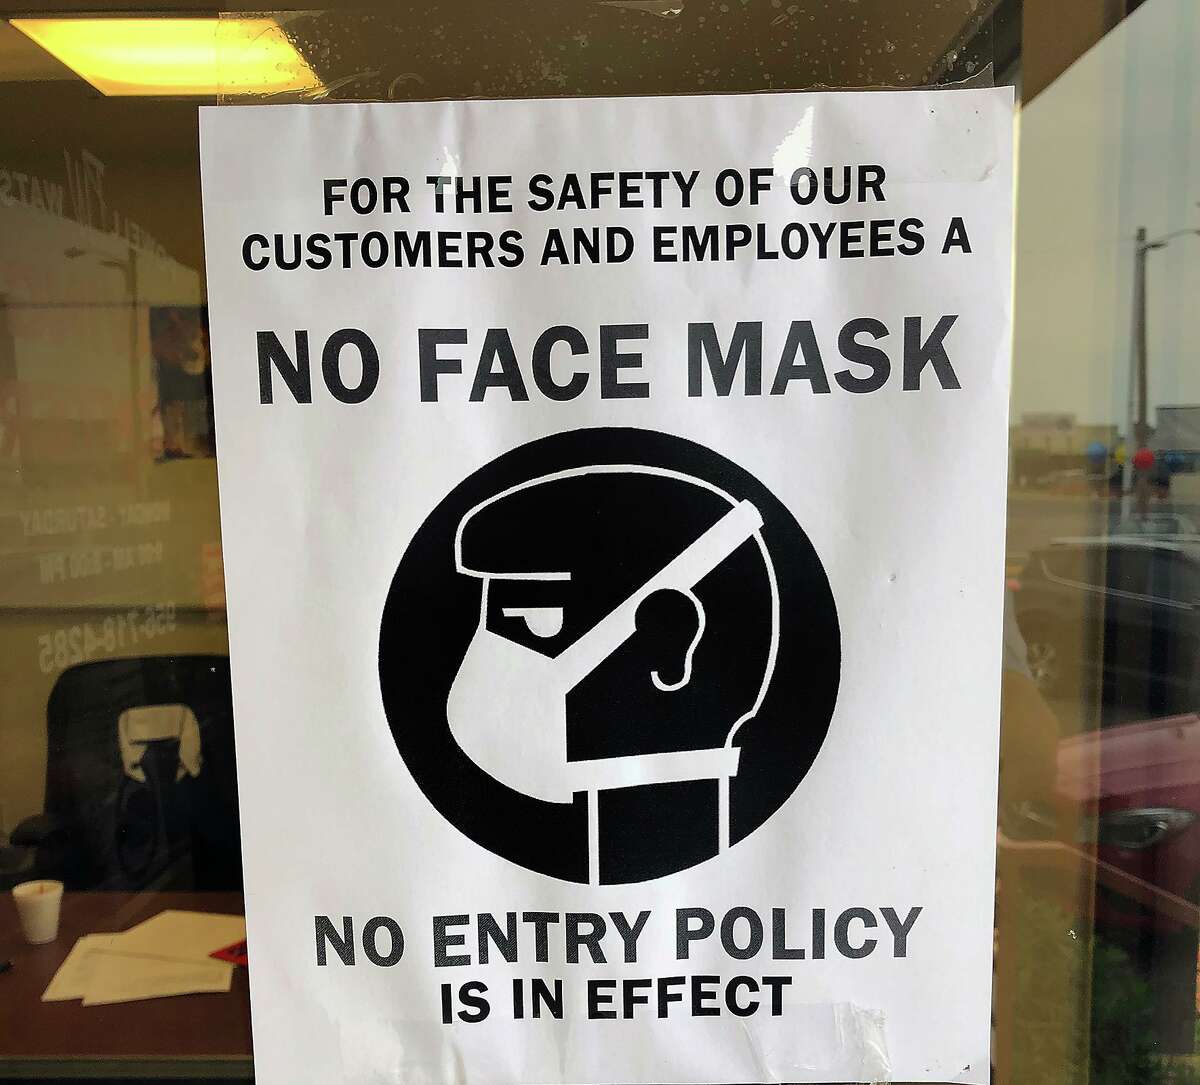 FILE — With the approval by City Council of an ordinance requiring citizens to cover their mouth and nose when entering an essential business, businesses like Powell Watson Savings Center on Saunders have posted signs enforcing a “No Face Mask, No Entry Policy” for the safety of their employees and customers.